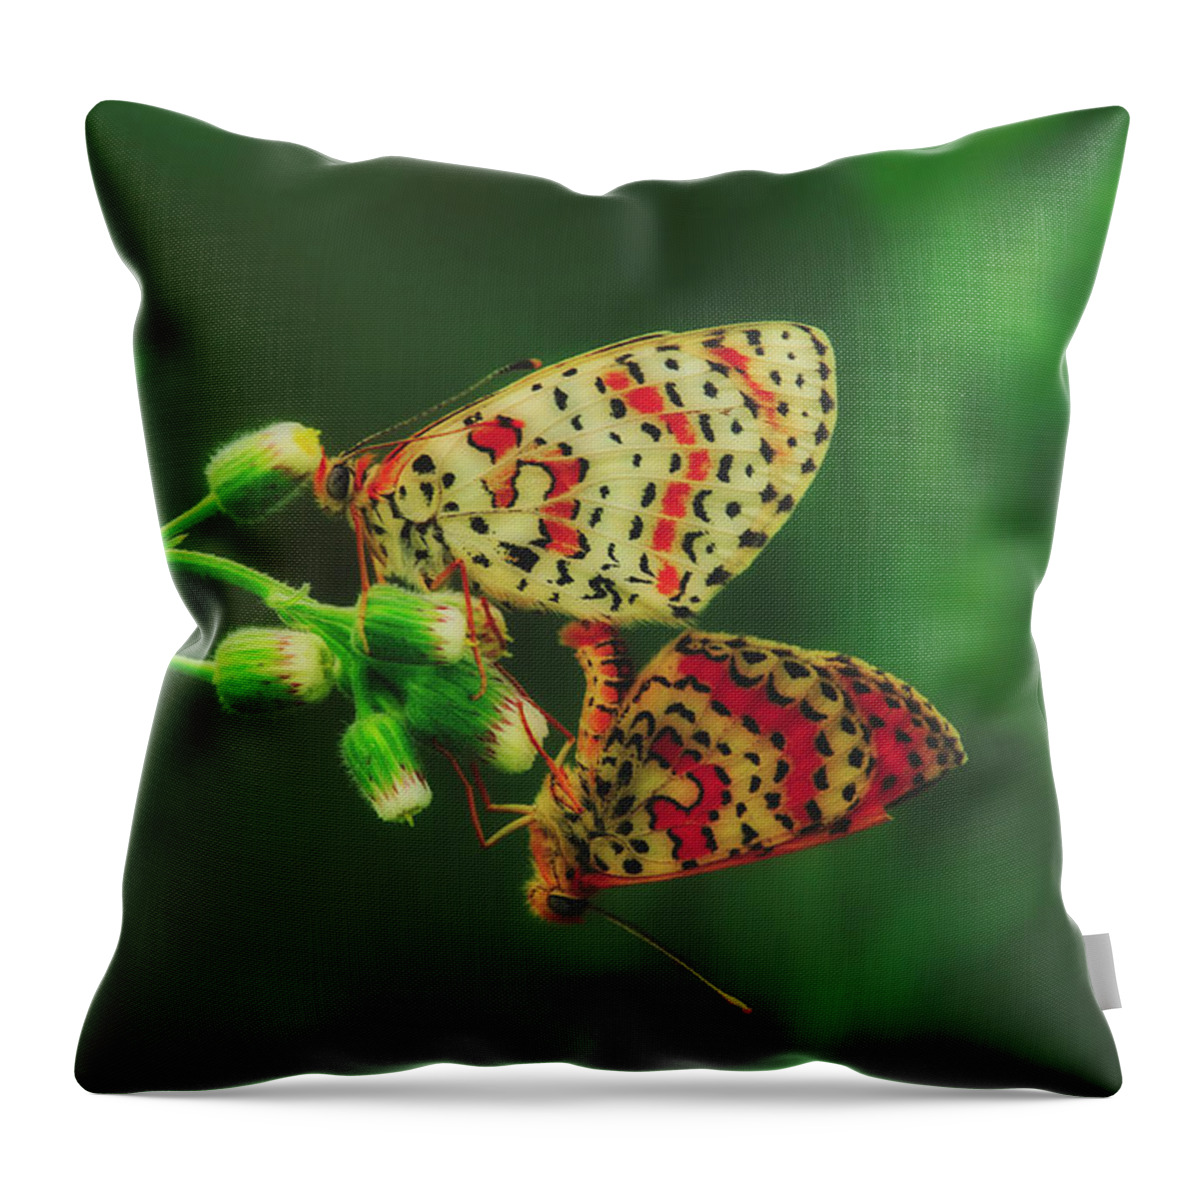 Melding Throw Pillow featuring the photograph Melding Beauty by Mountain Dreams